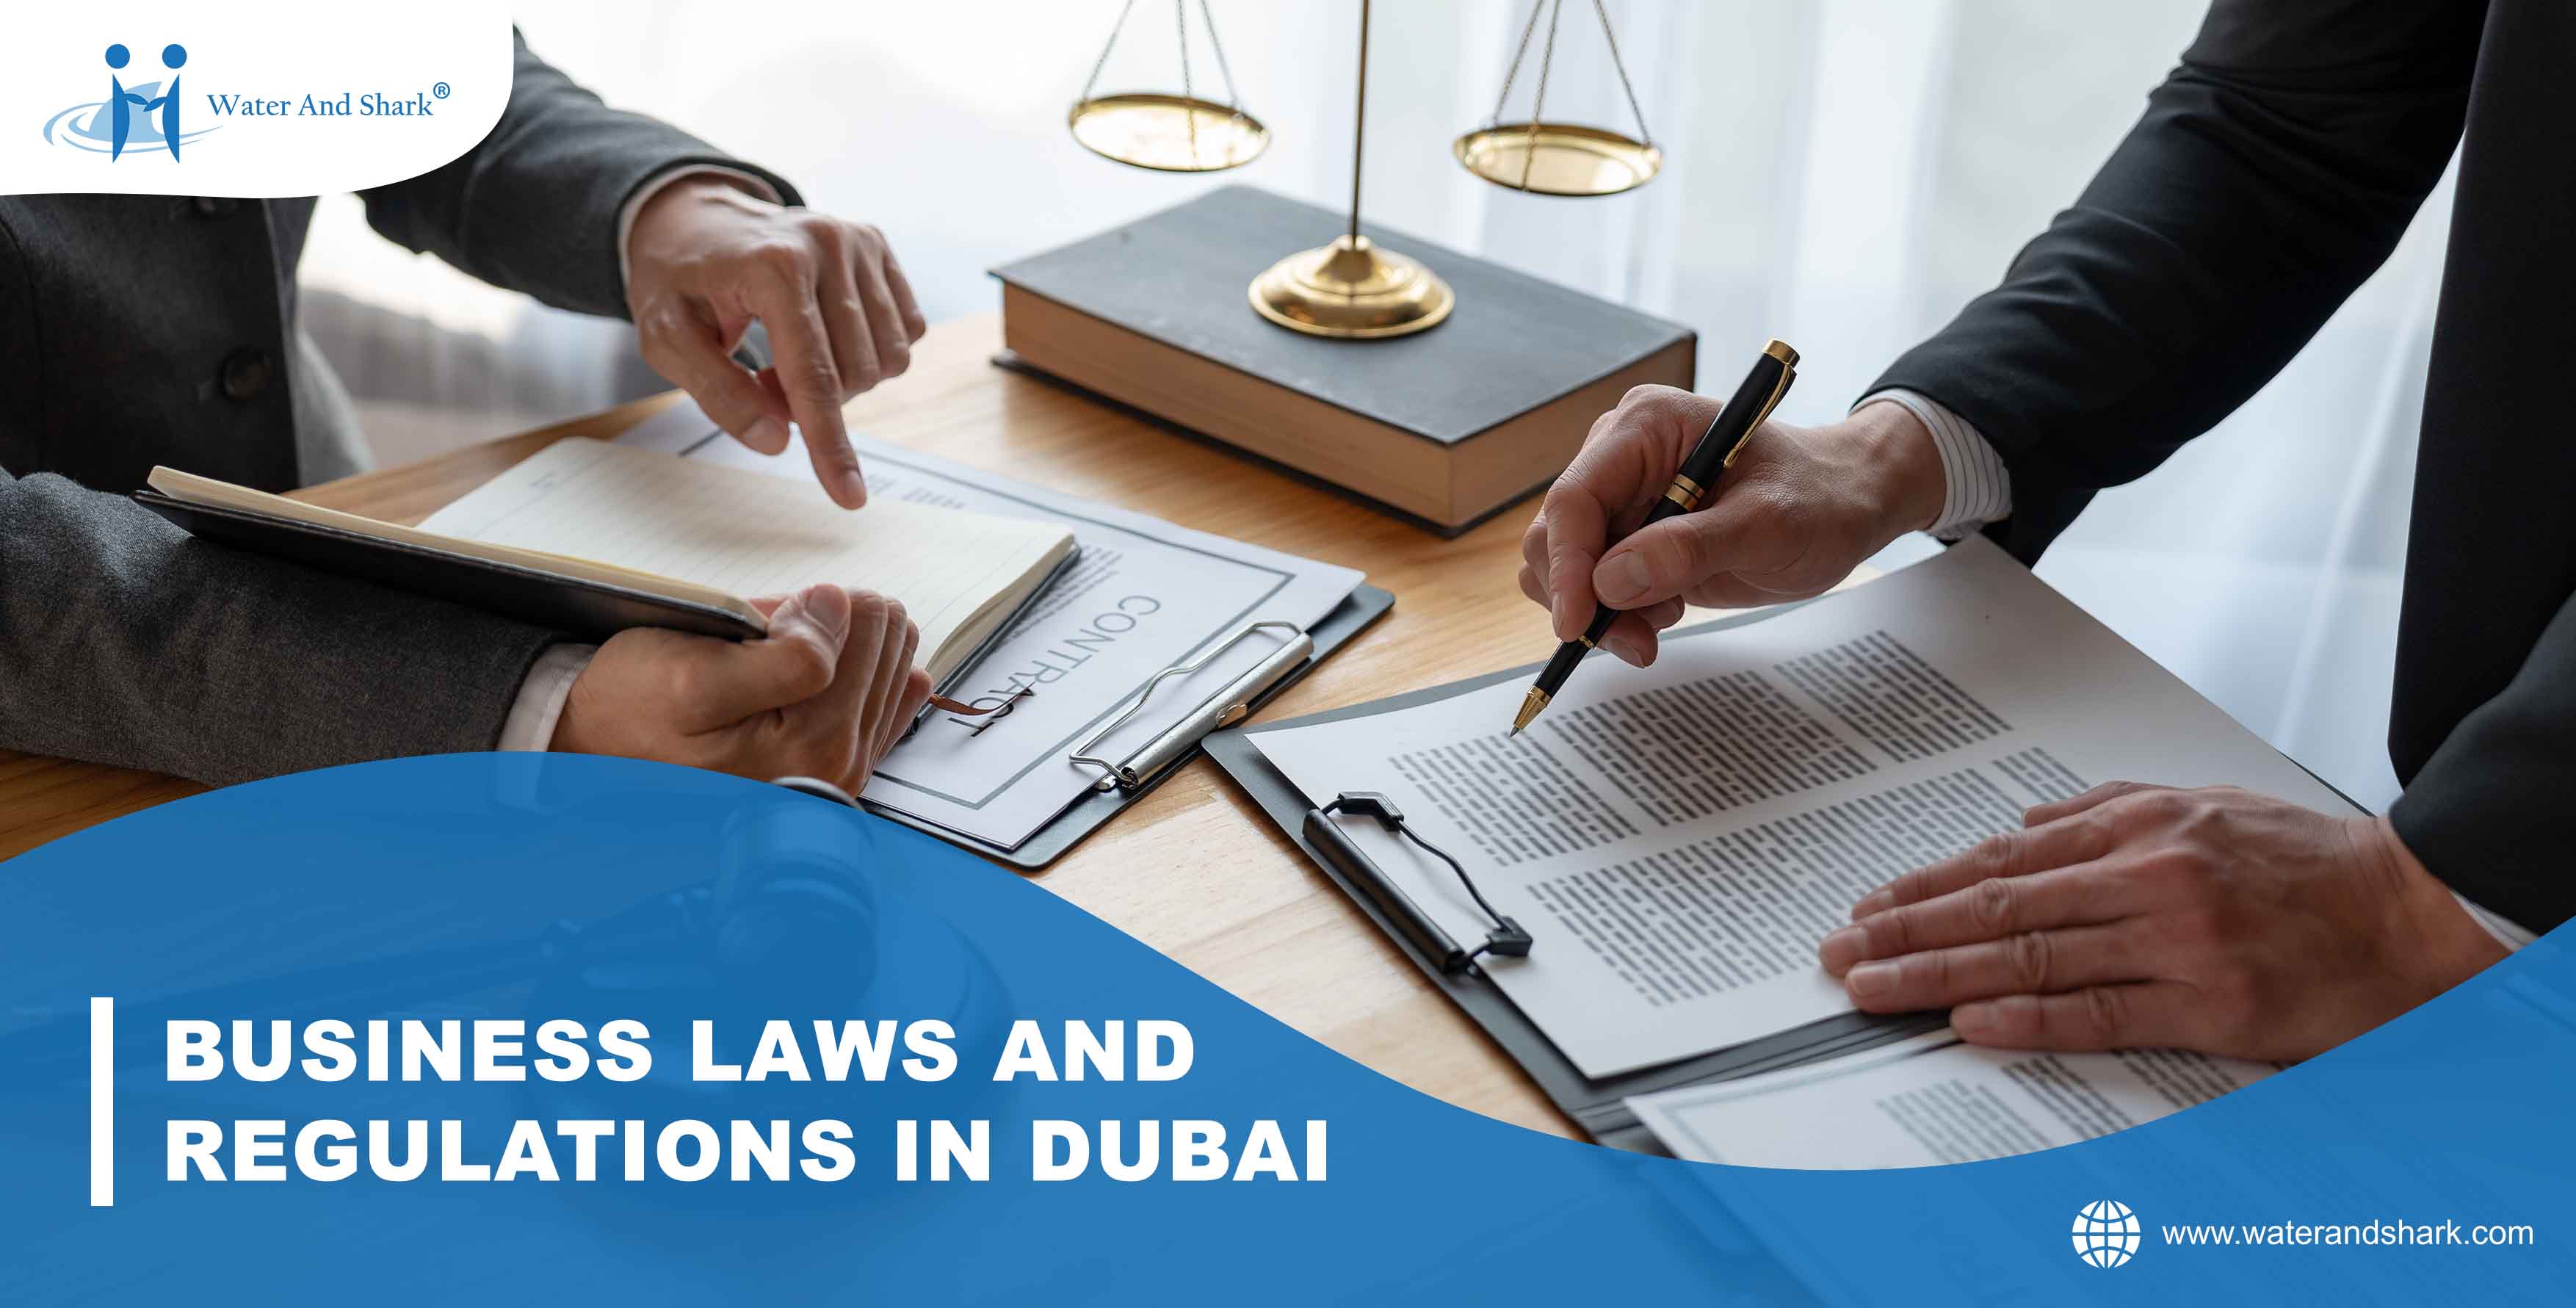 BUSINESS_LAWS_AND_REGULATIONS_IN_DUBAI_650x1280_low_size.jpg